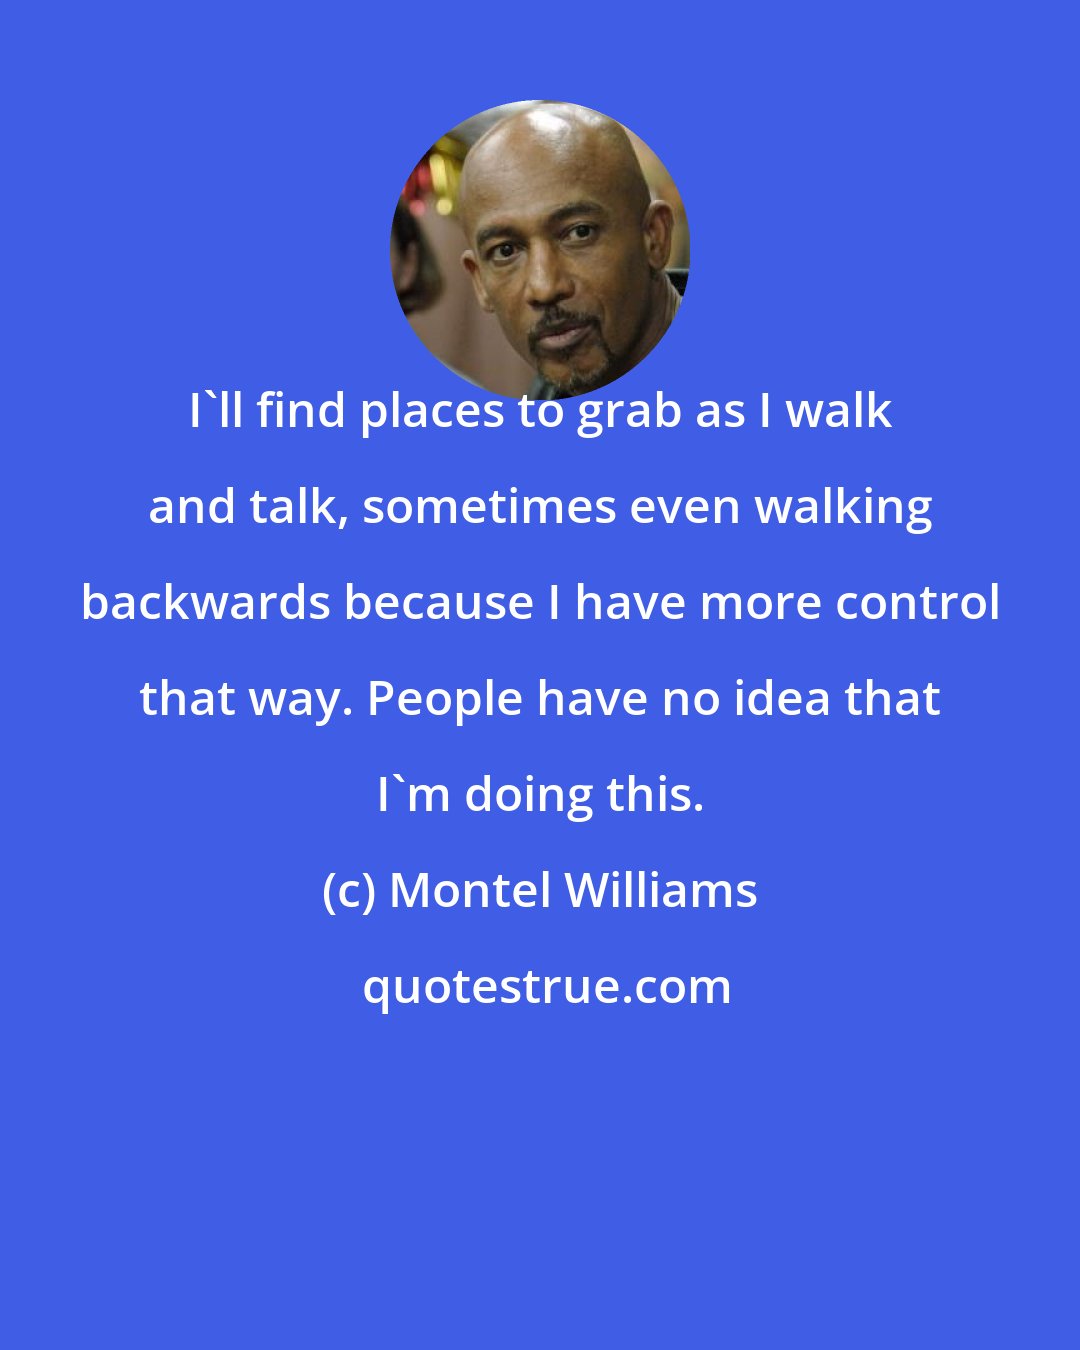 Montel Williams: I'll find places to grab as I walk and talk, sometimes even walking backwards because I have more control that way. People have no idea that I'm doing this.